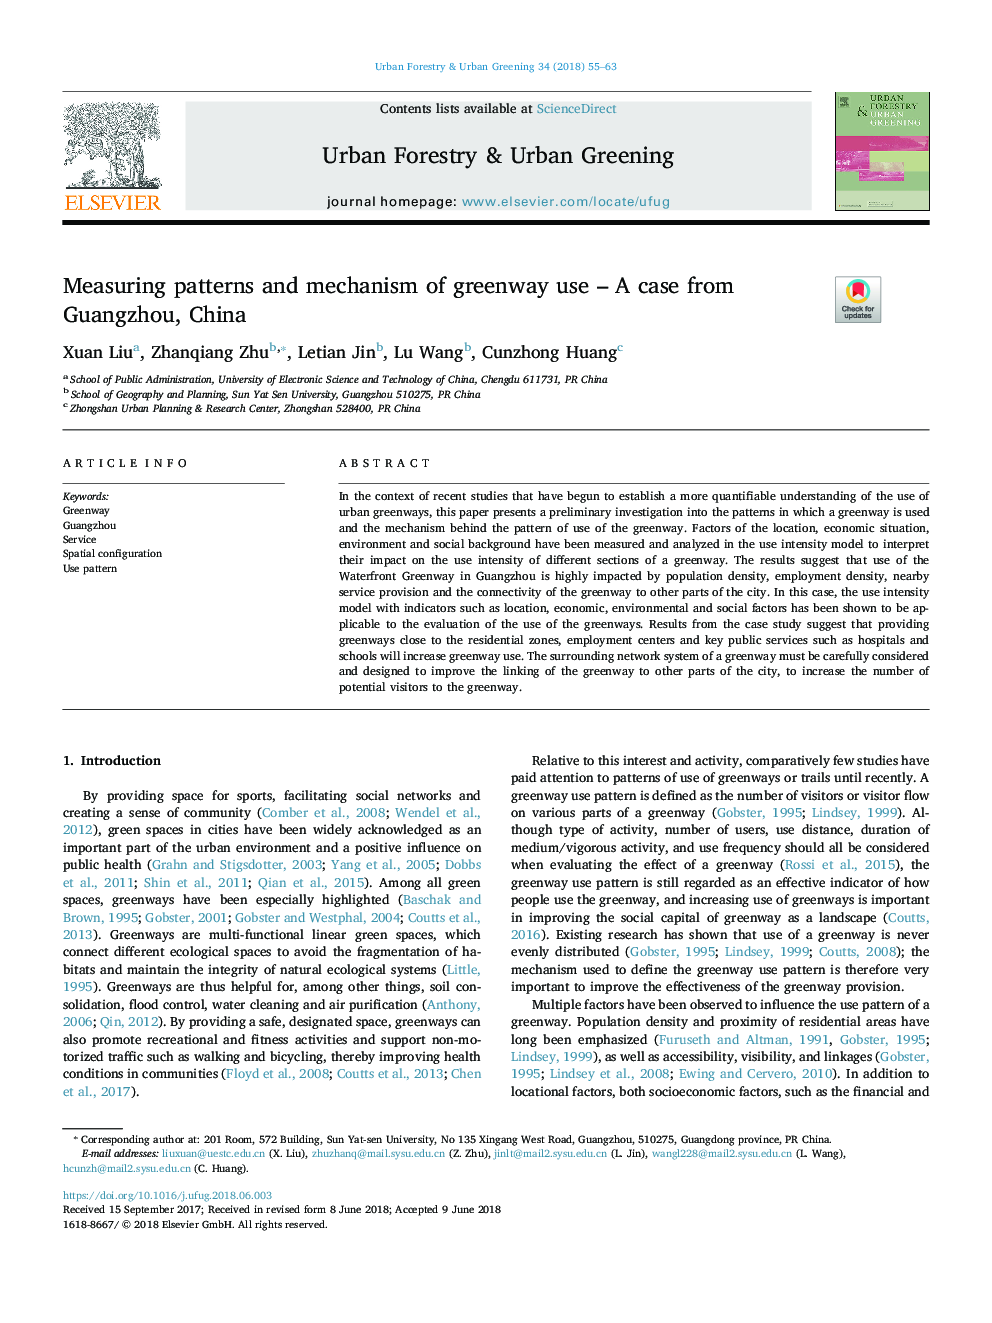 Measuring patterns and mechanism of greenway use - A case from Guangzhou, China